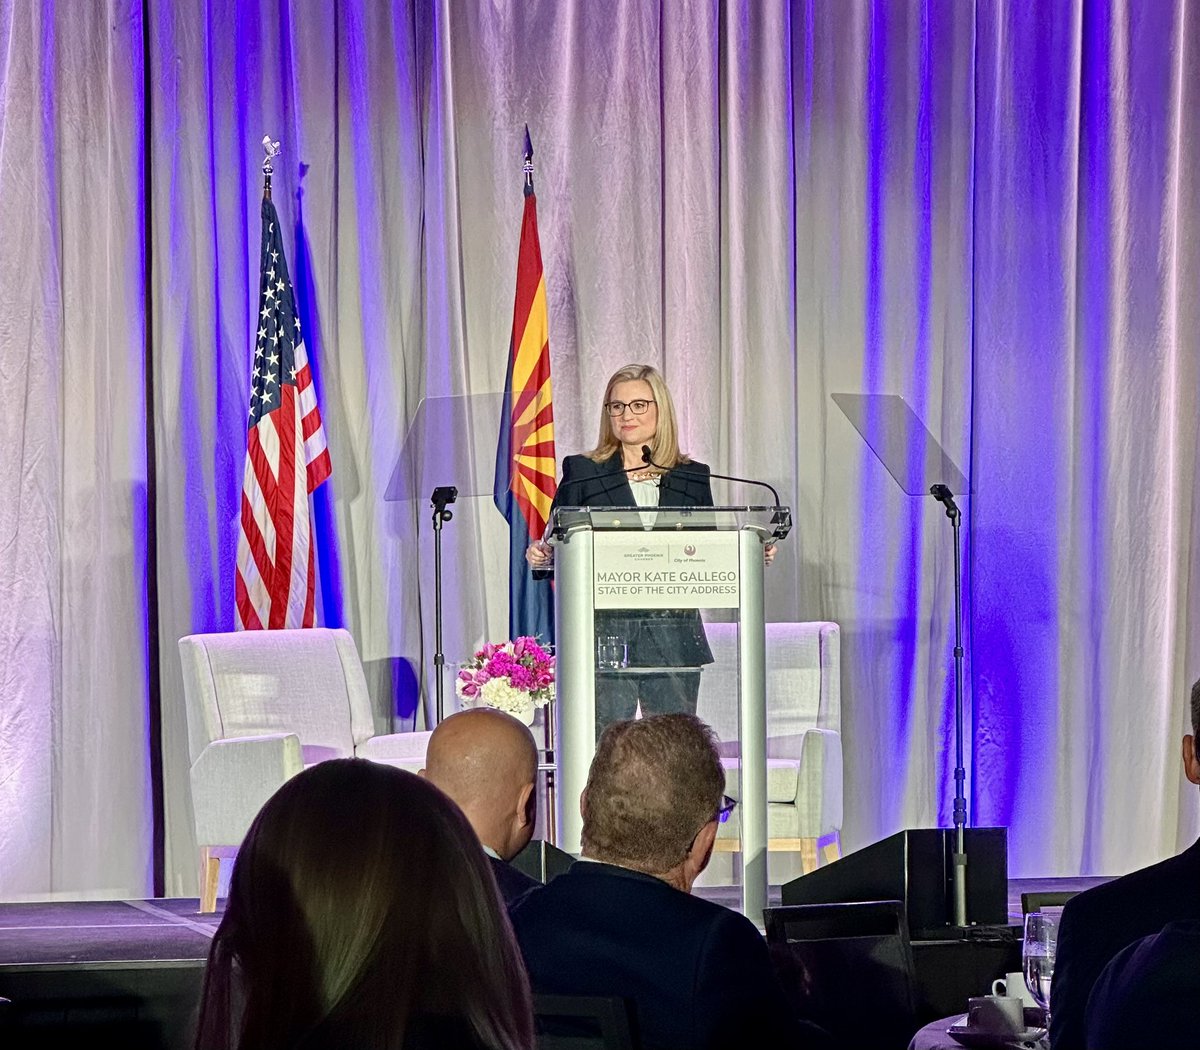 Phoenix continues to lead the way in innovation. - largest autonomous vehicle network - best airport in America - continued investment in infrastructure, health care, semiconductor manufacturing, and so much more! @phxchamber @MayorGallego #SOTC2024